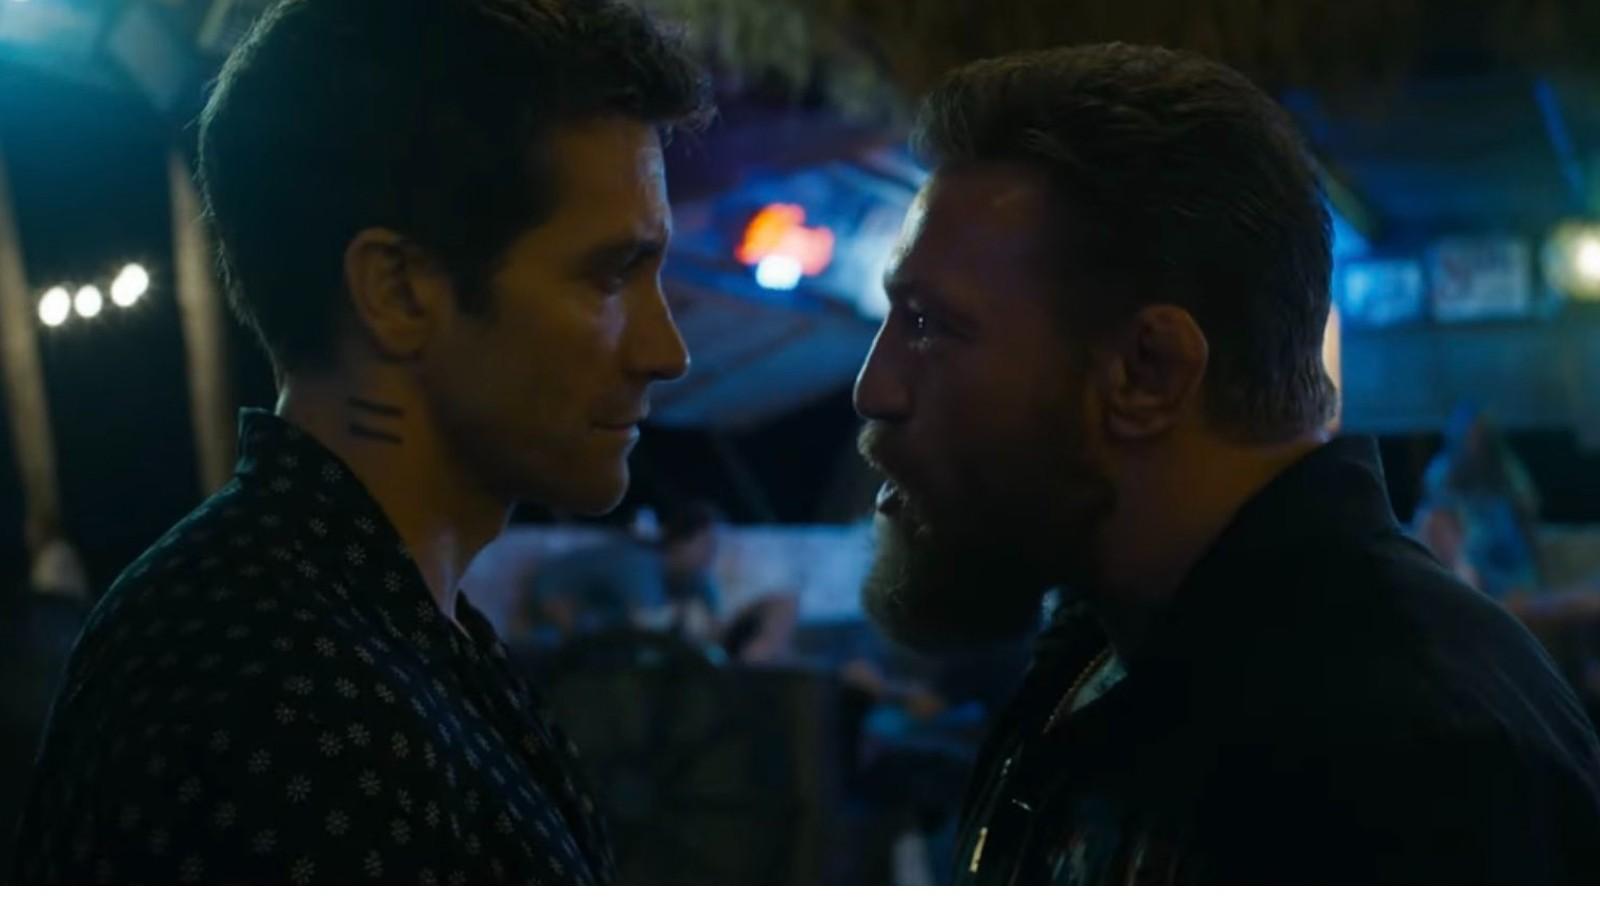 Jake Gyllenhaal and Conor McGregor face-to-face in Road House.